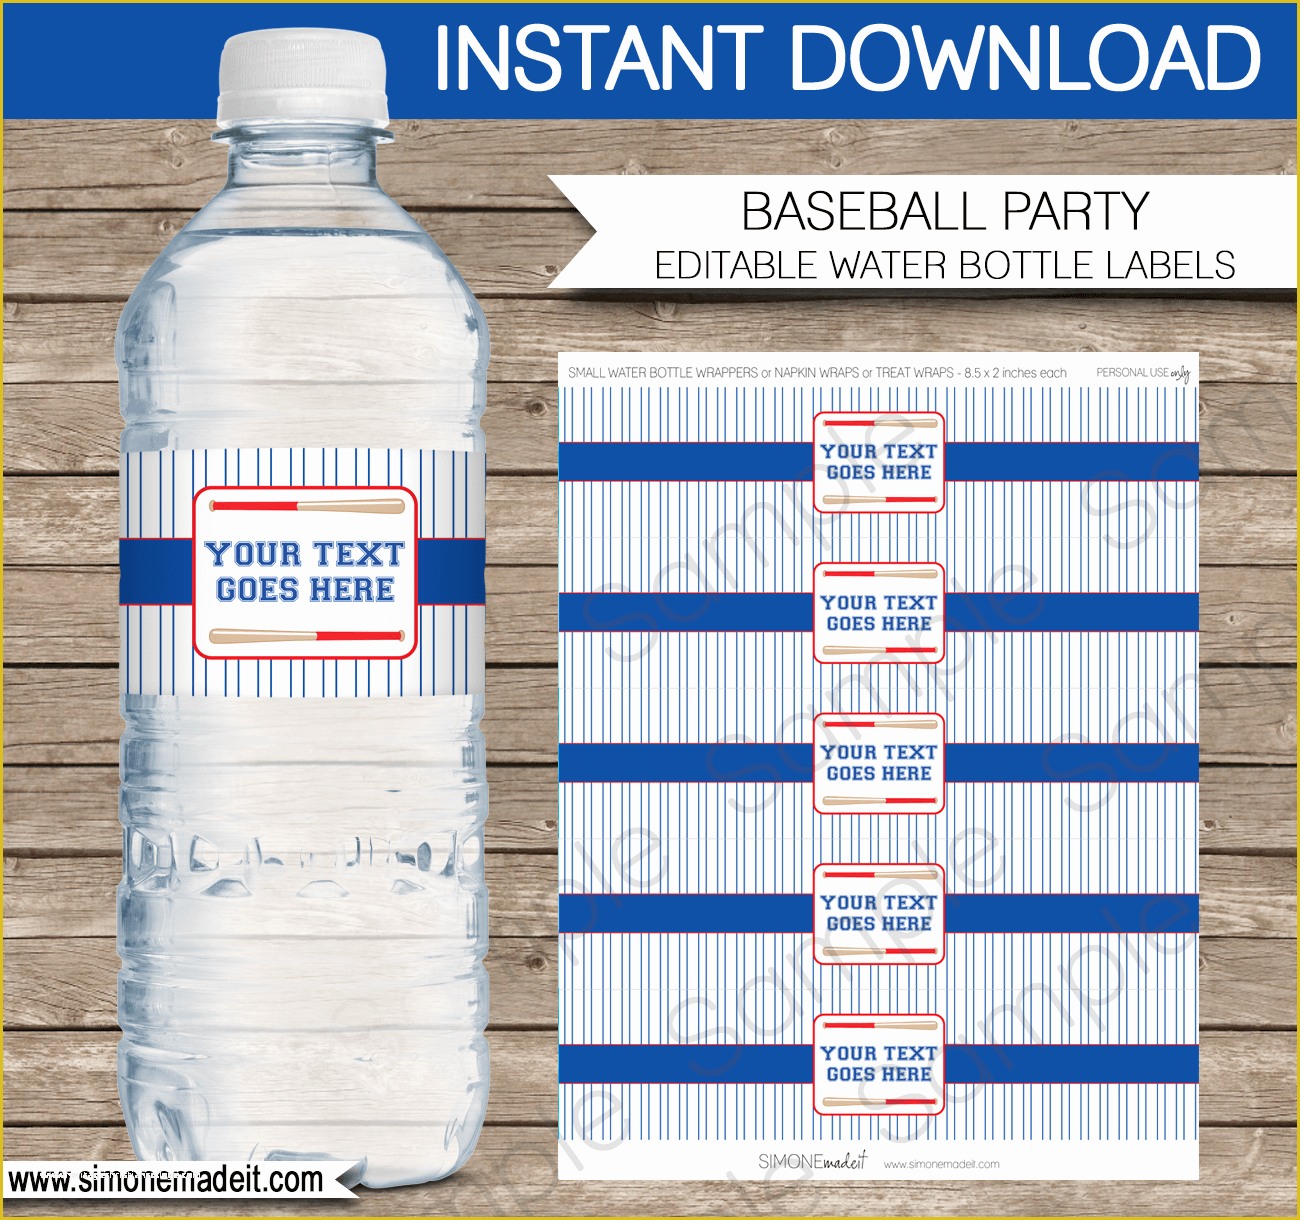 8 Oz Water Bottle Label Template Free Of Baseball Party Water Bottle Labels